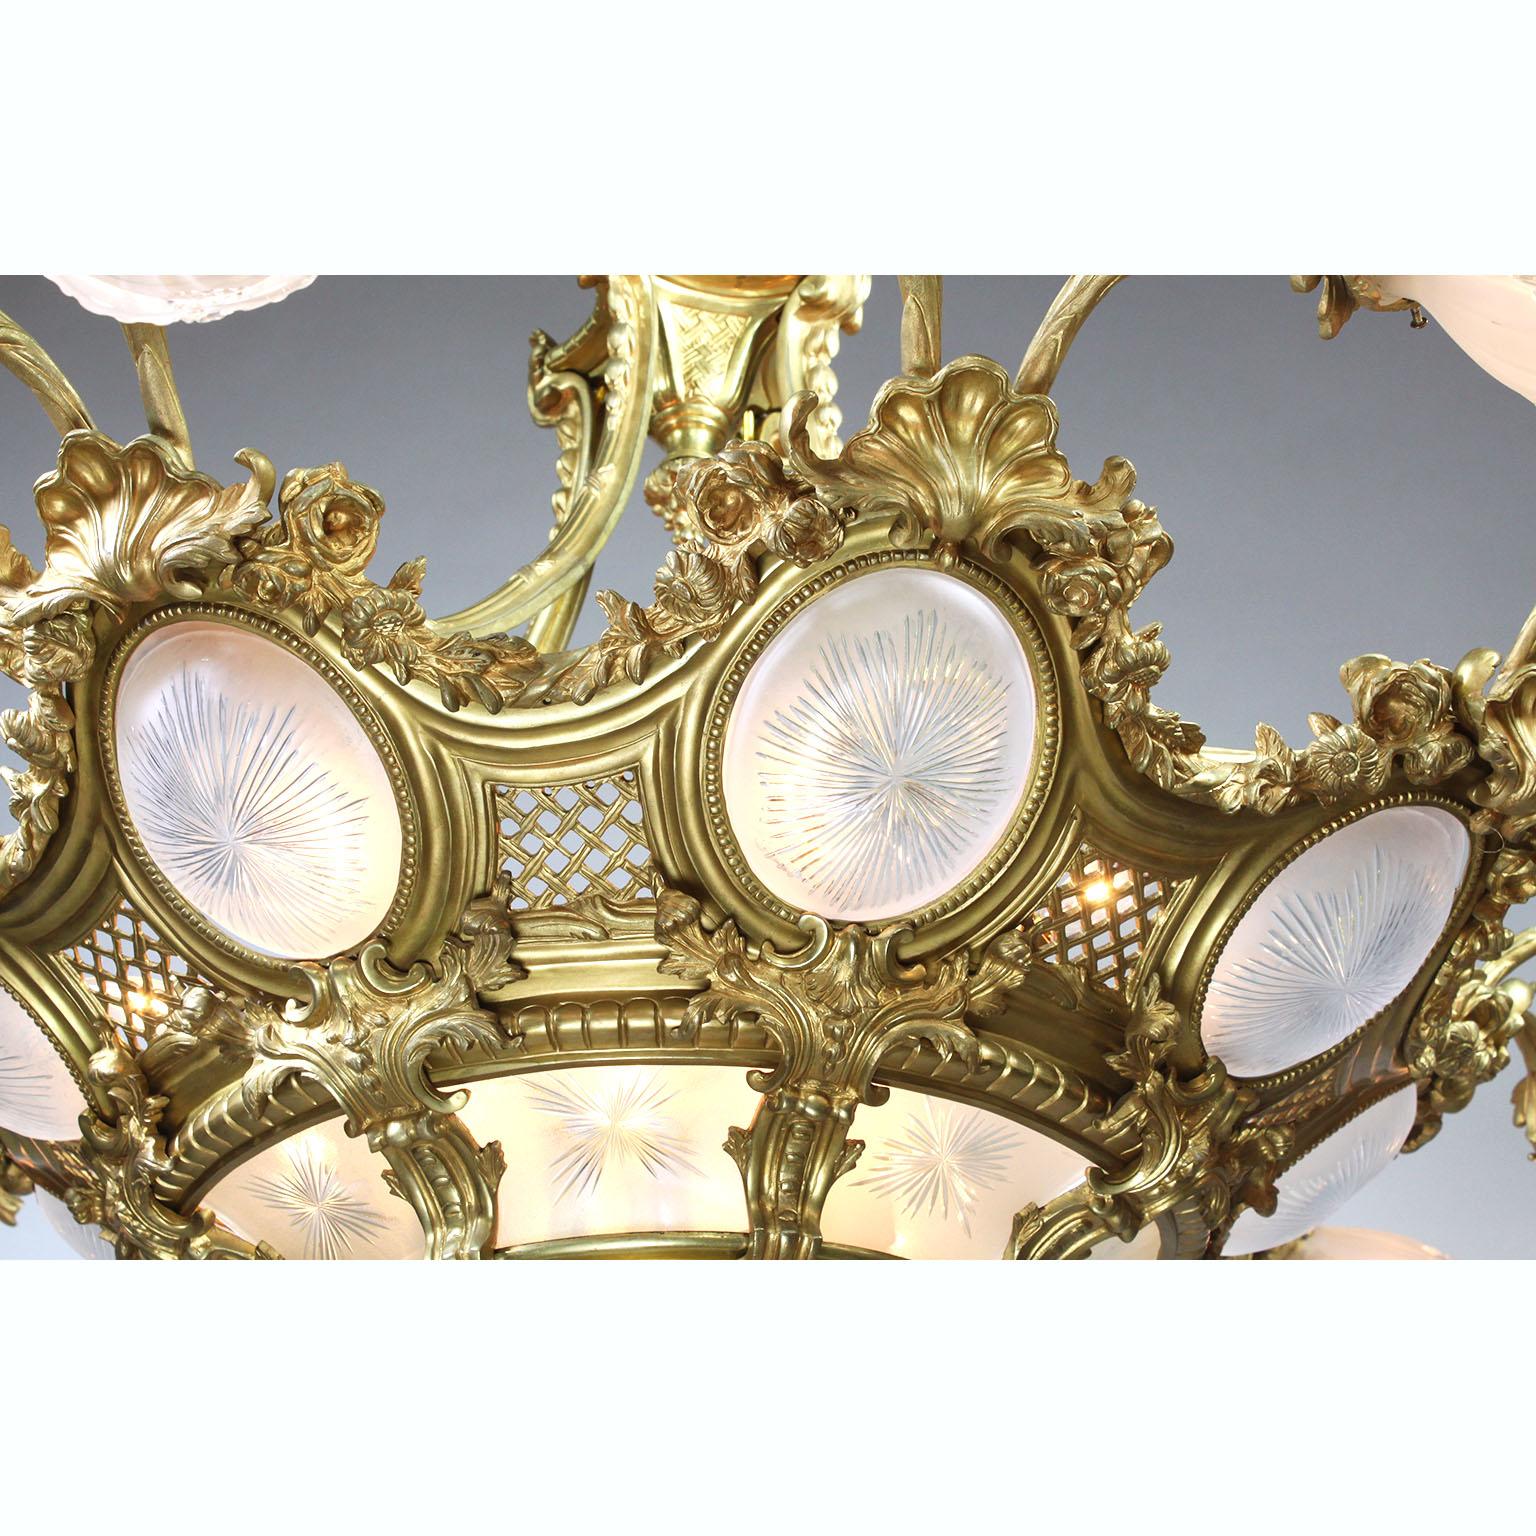 Early 20th Century French Belle Époque Gilt-Bronze & Molded Glass 16 Light Plafonnier Chandelier For Sale